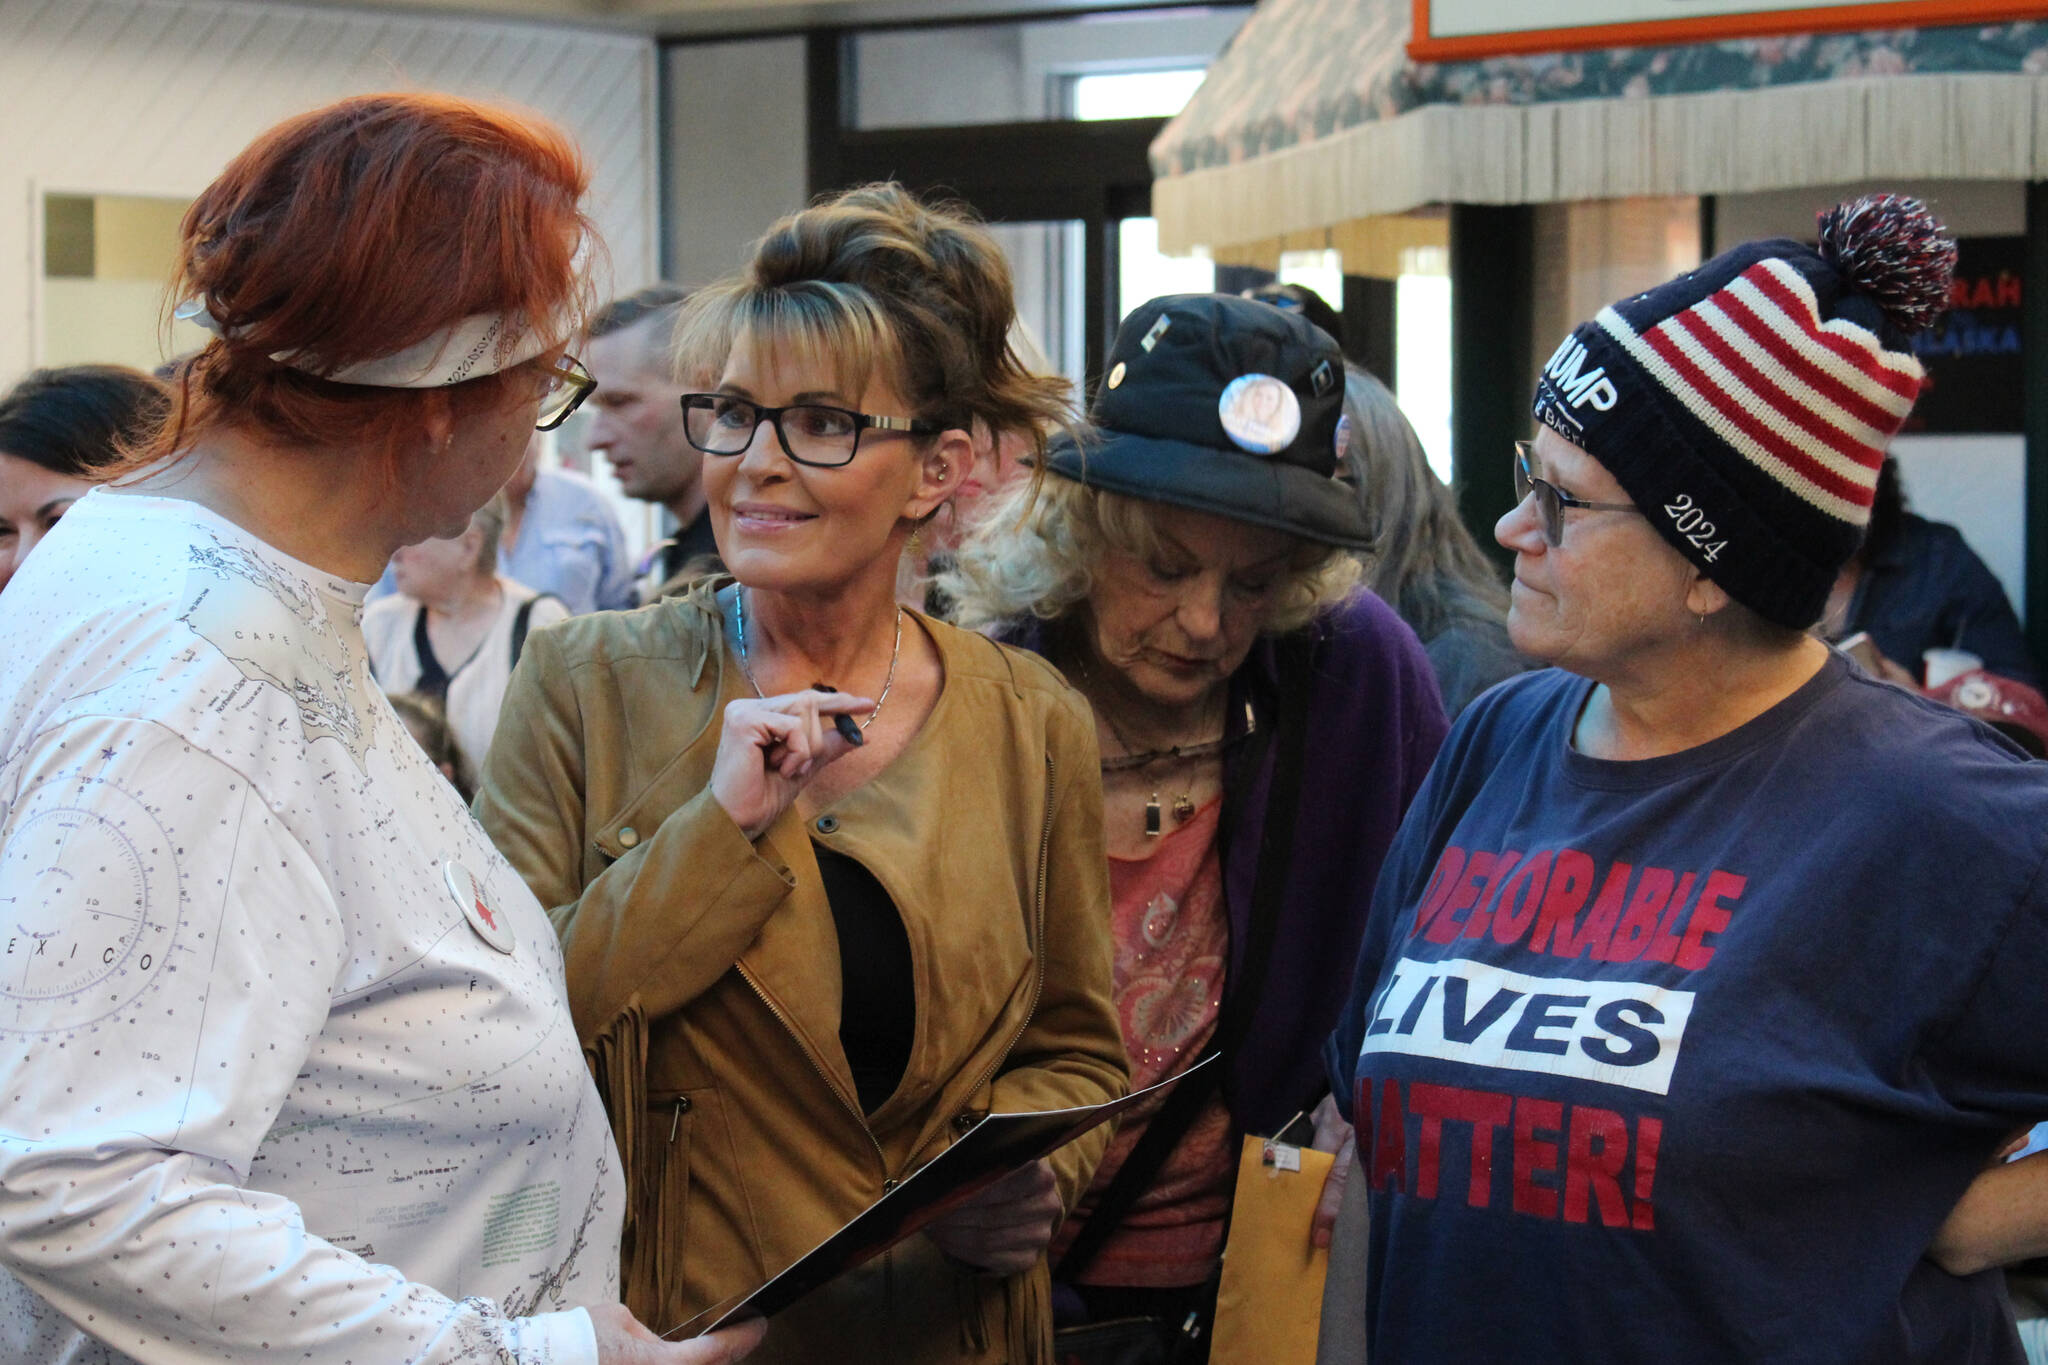 Former Alaska governor and current congressional hopeful Sarah Palin speaks with attendees at a meet-and-greet event outside of Ginger’s Restaurant on Saturday, May 14, 2022, in Soldotna, Alaska. (Ashlyn O’Hara/Peninsula Clarion)